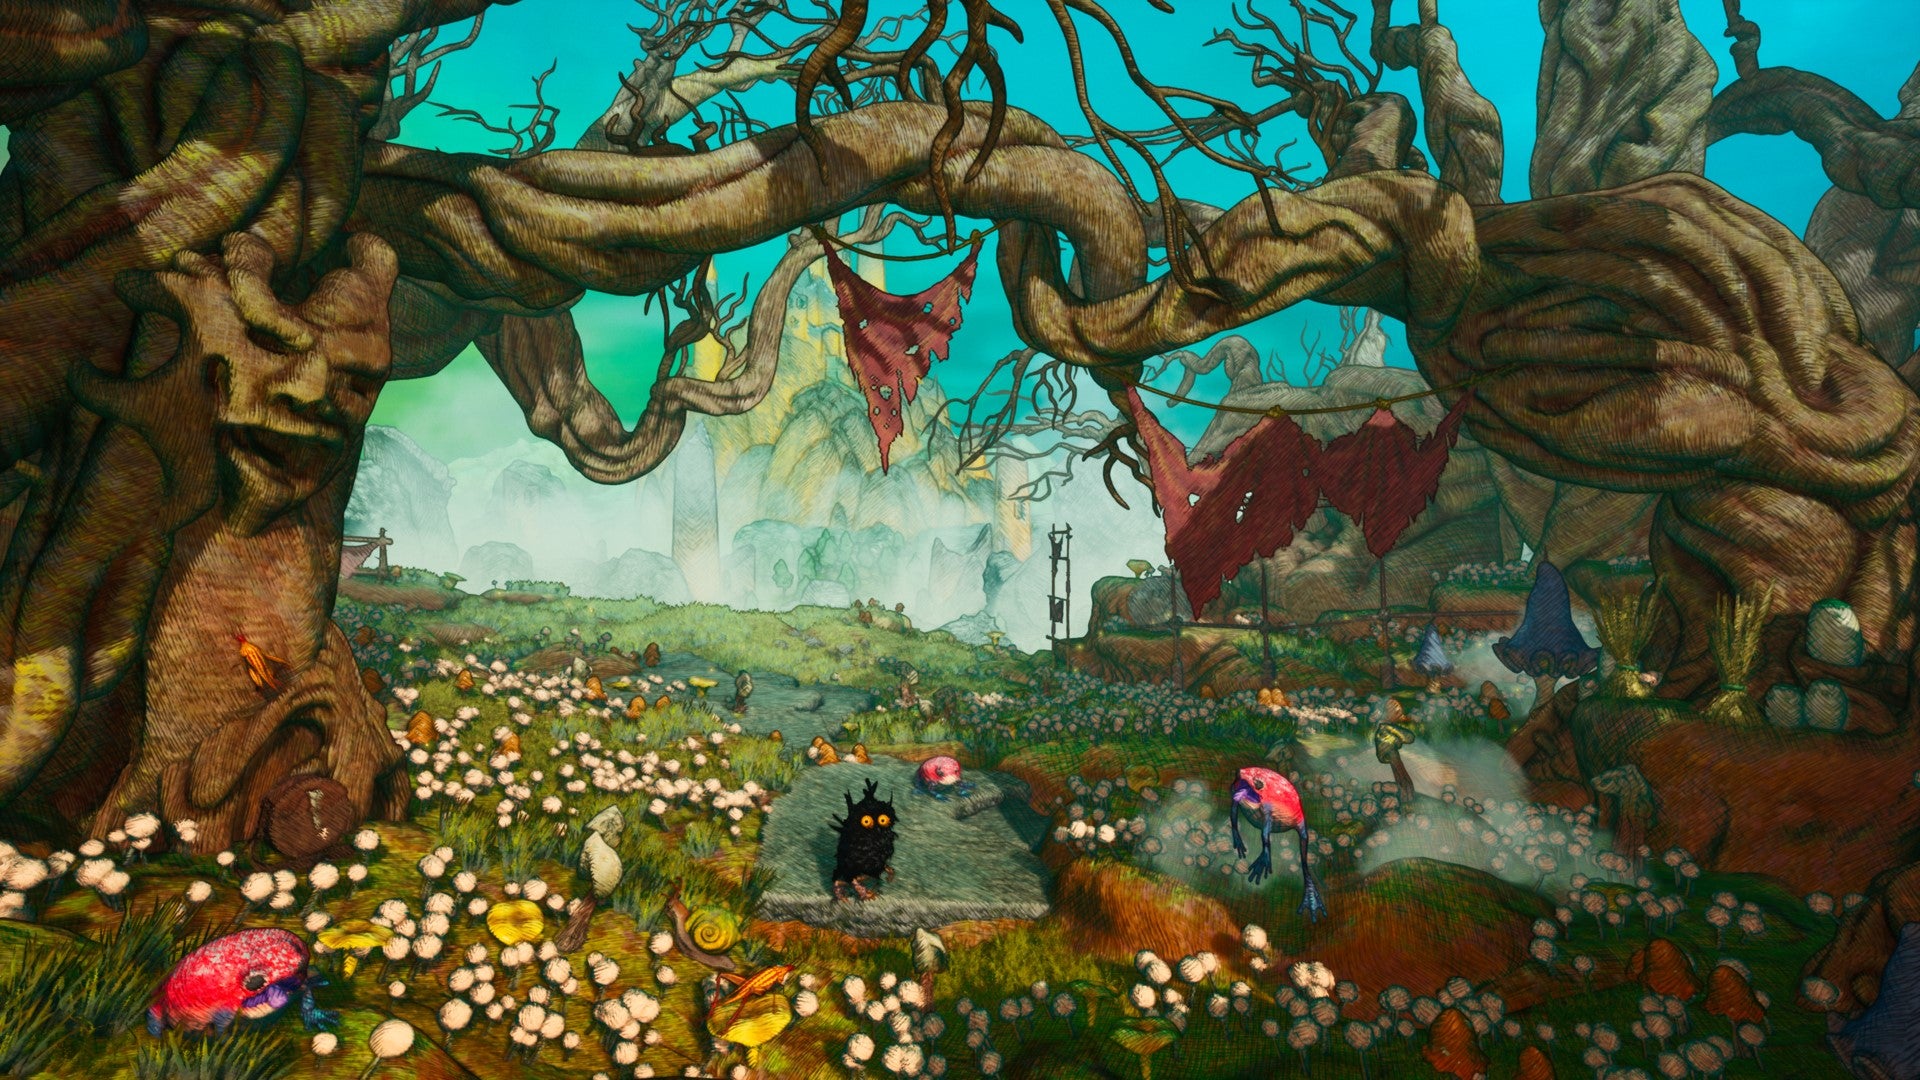 A boy stands in a colorful mushroom grove surrounded by gnarled trees in Clash: Artifacts Of Chaos.